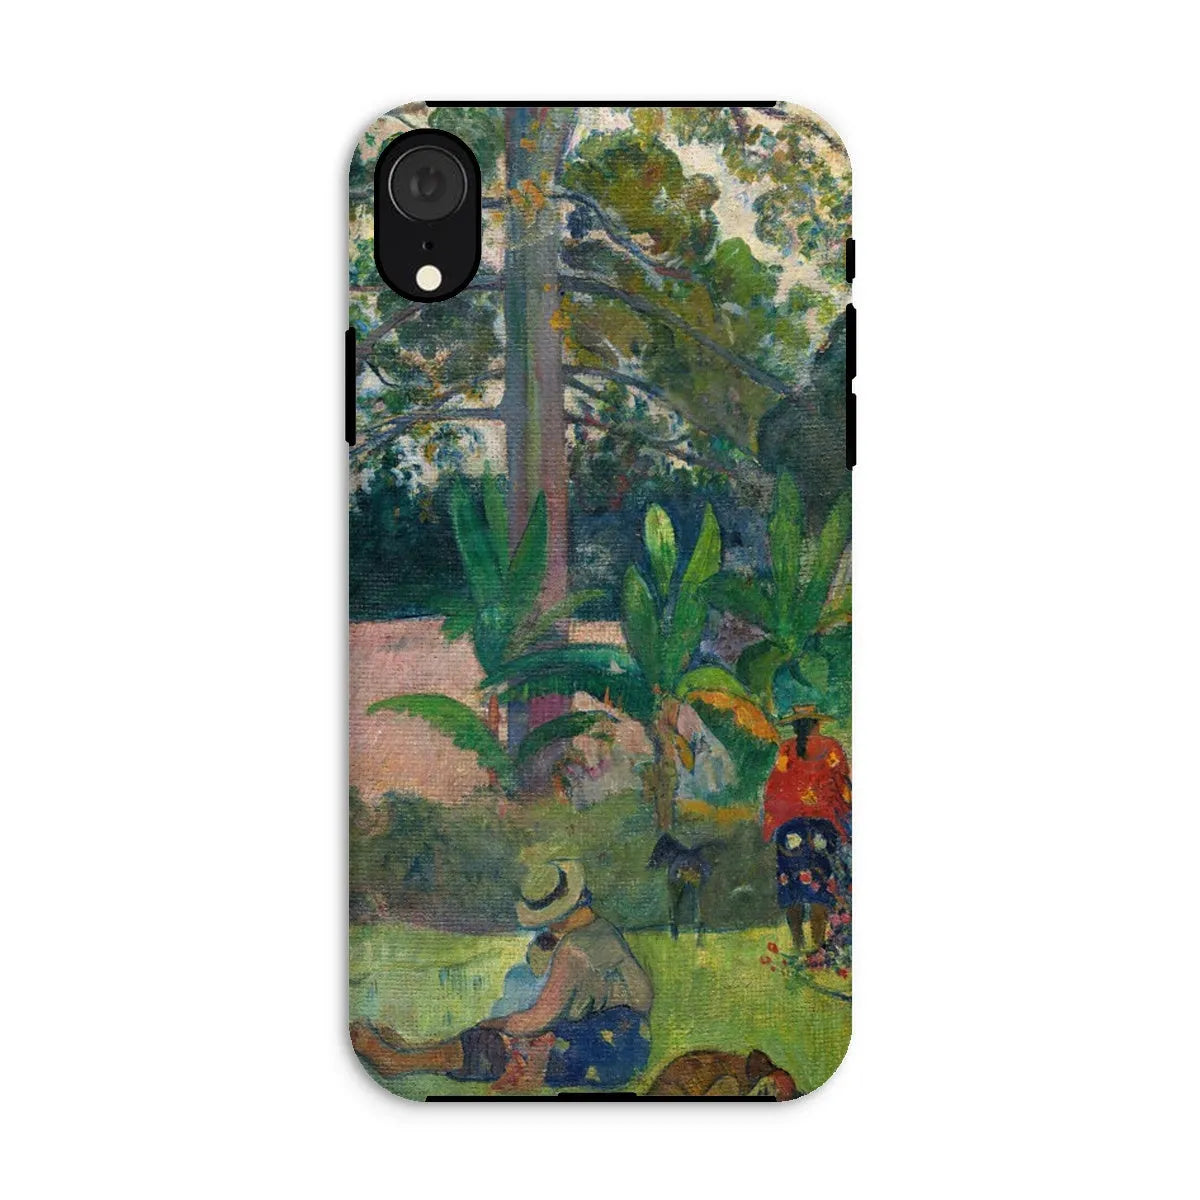 The Big Tree - Post-impressionist Phone Case - Paul Gauguin - Iphone Xr / Matte - Mobile Phone Cases - Aesthetic Art